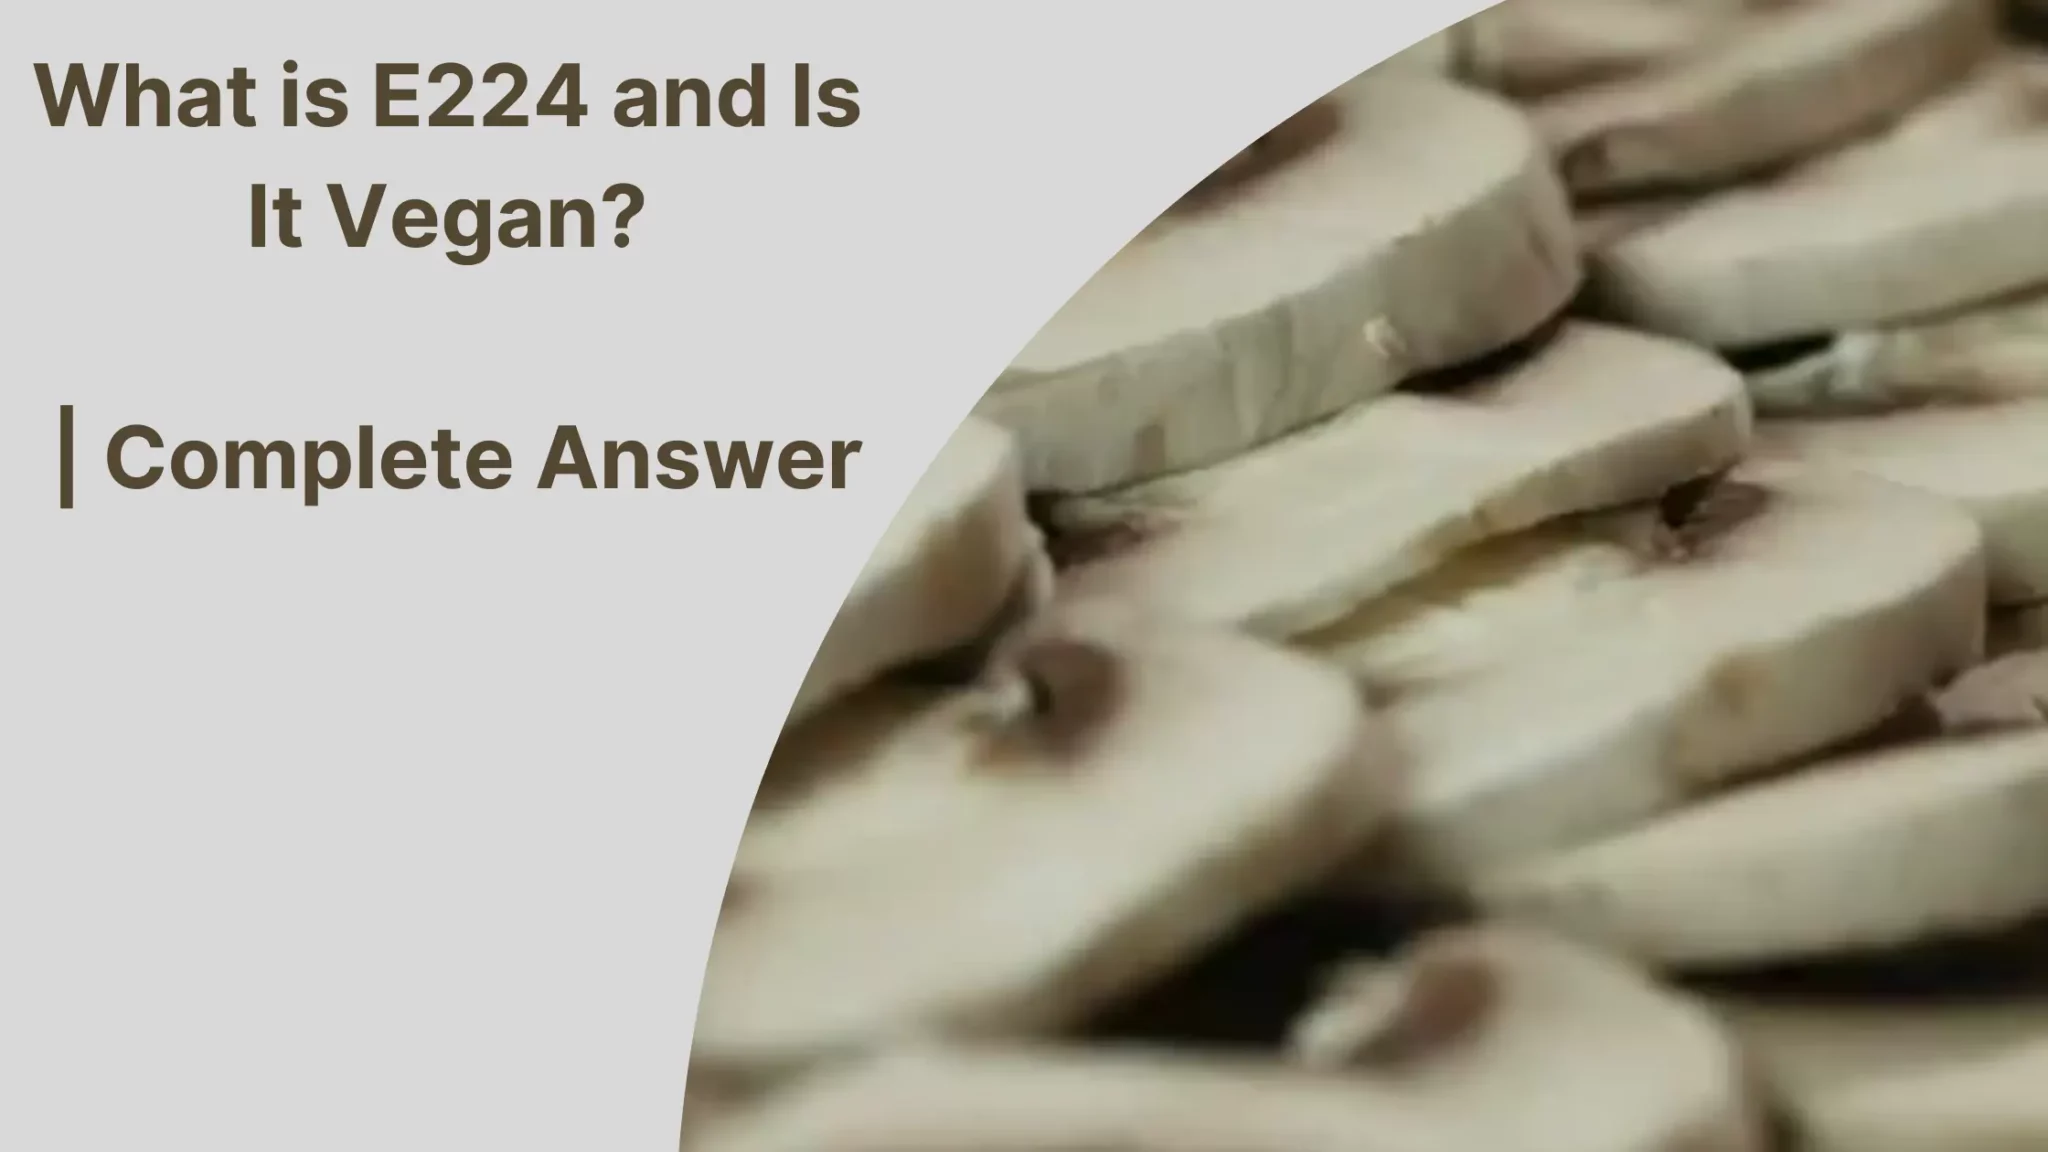 What is E224 and Is It Vegan?